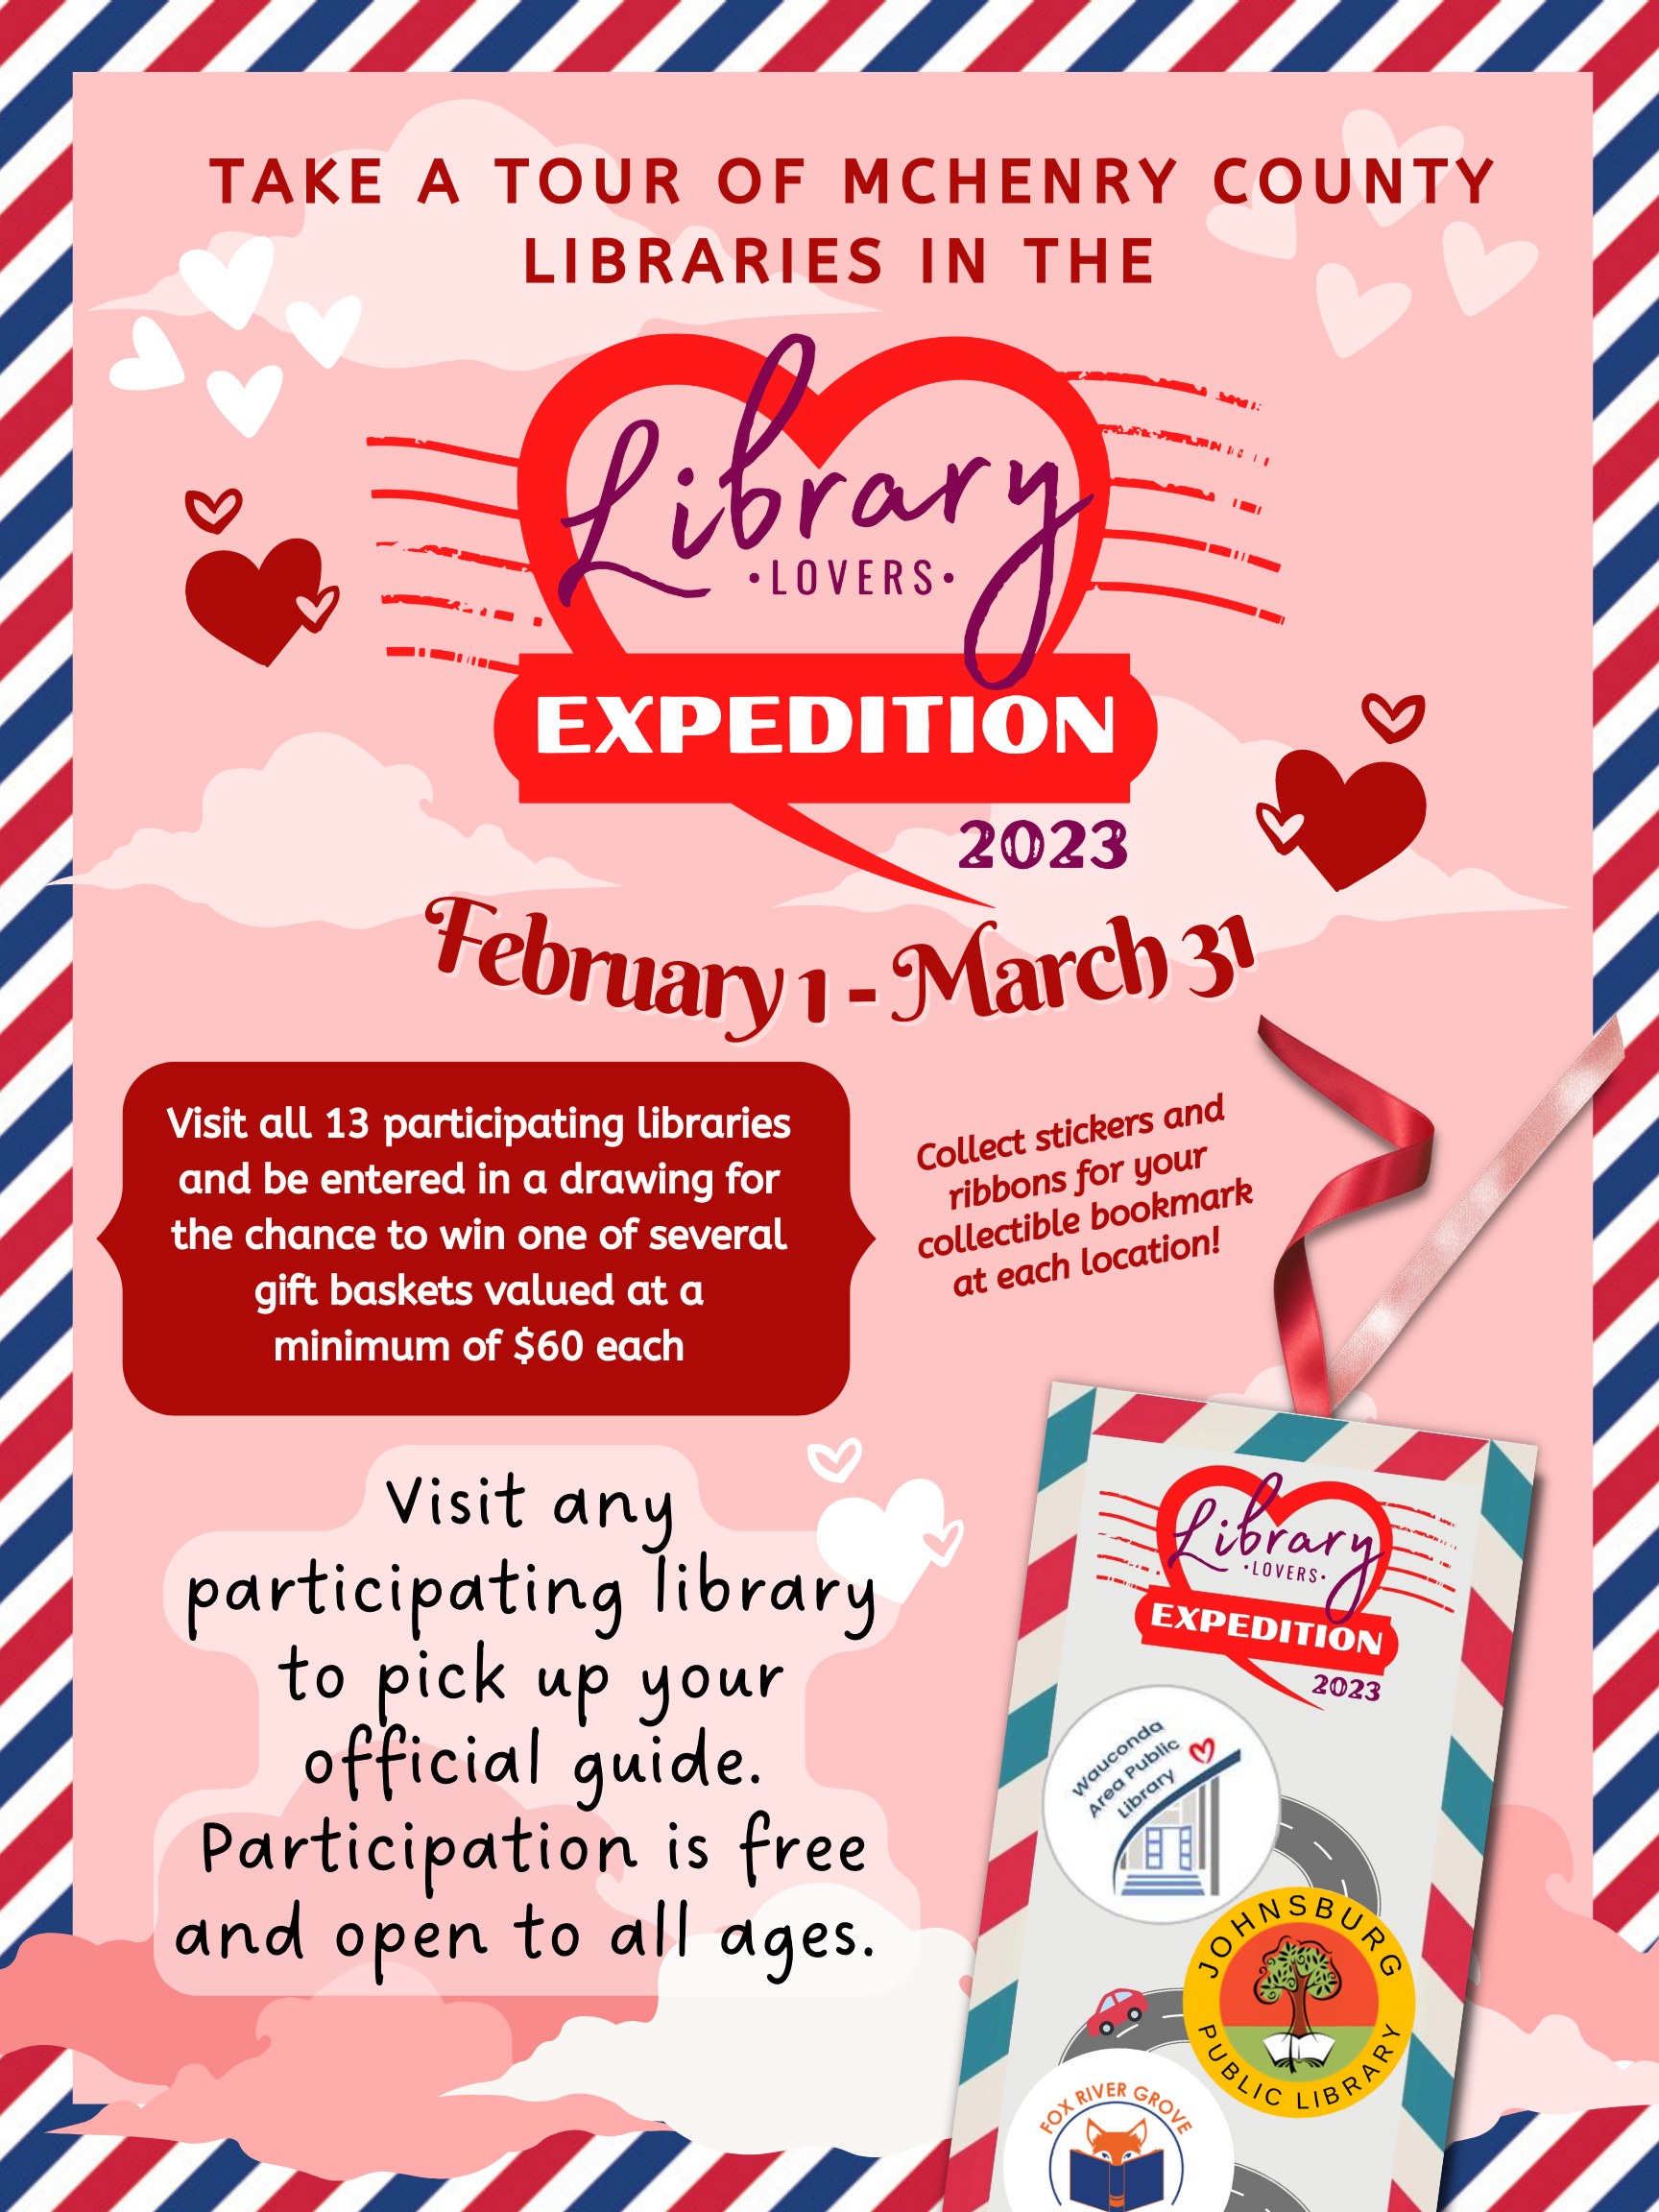 Library Lovers Expedition 2023 image